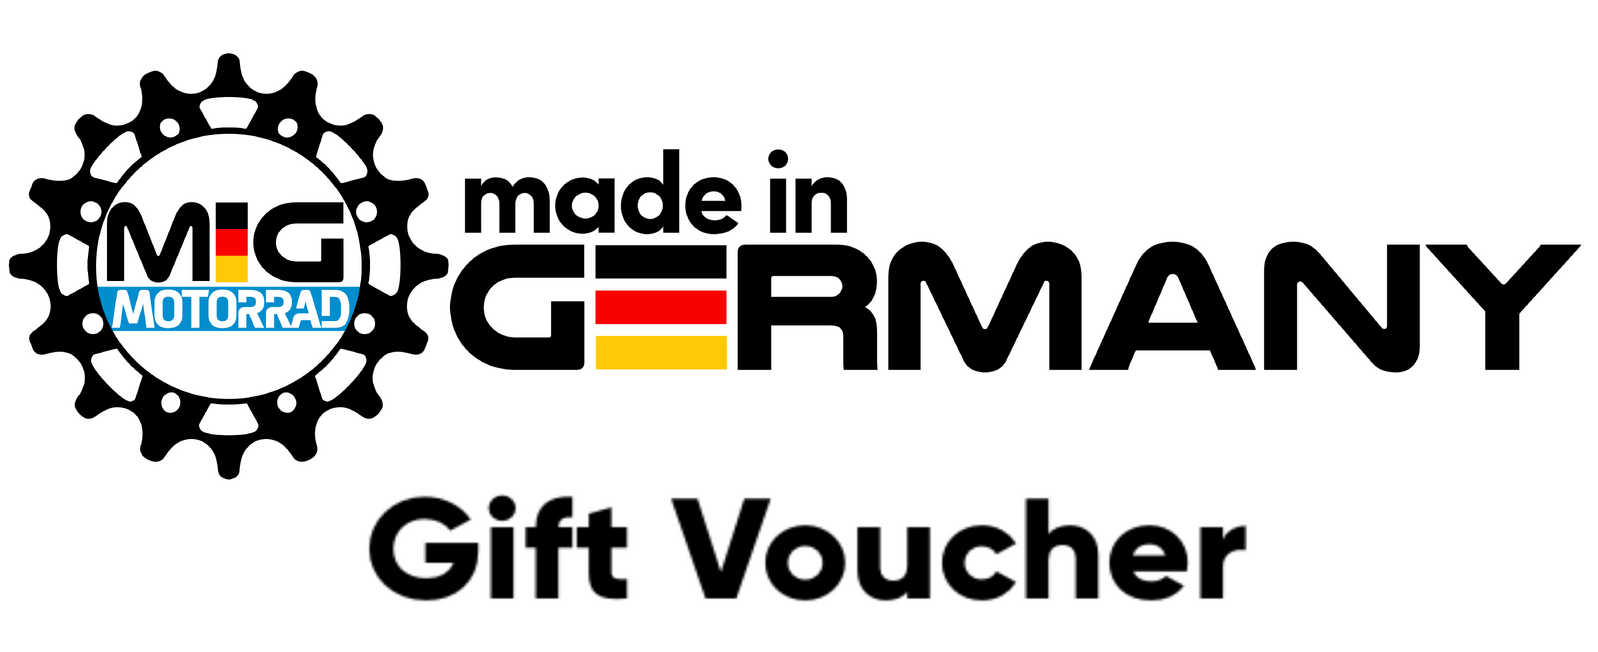 Made in Germany Motorad Gift Voucher